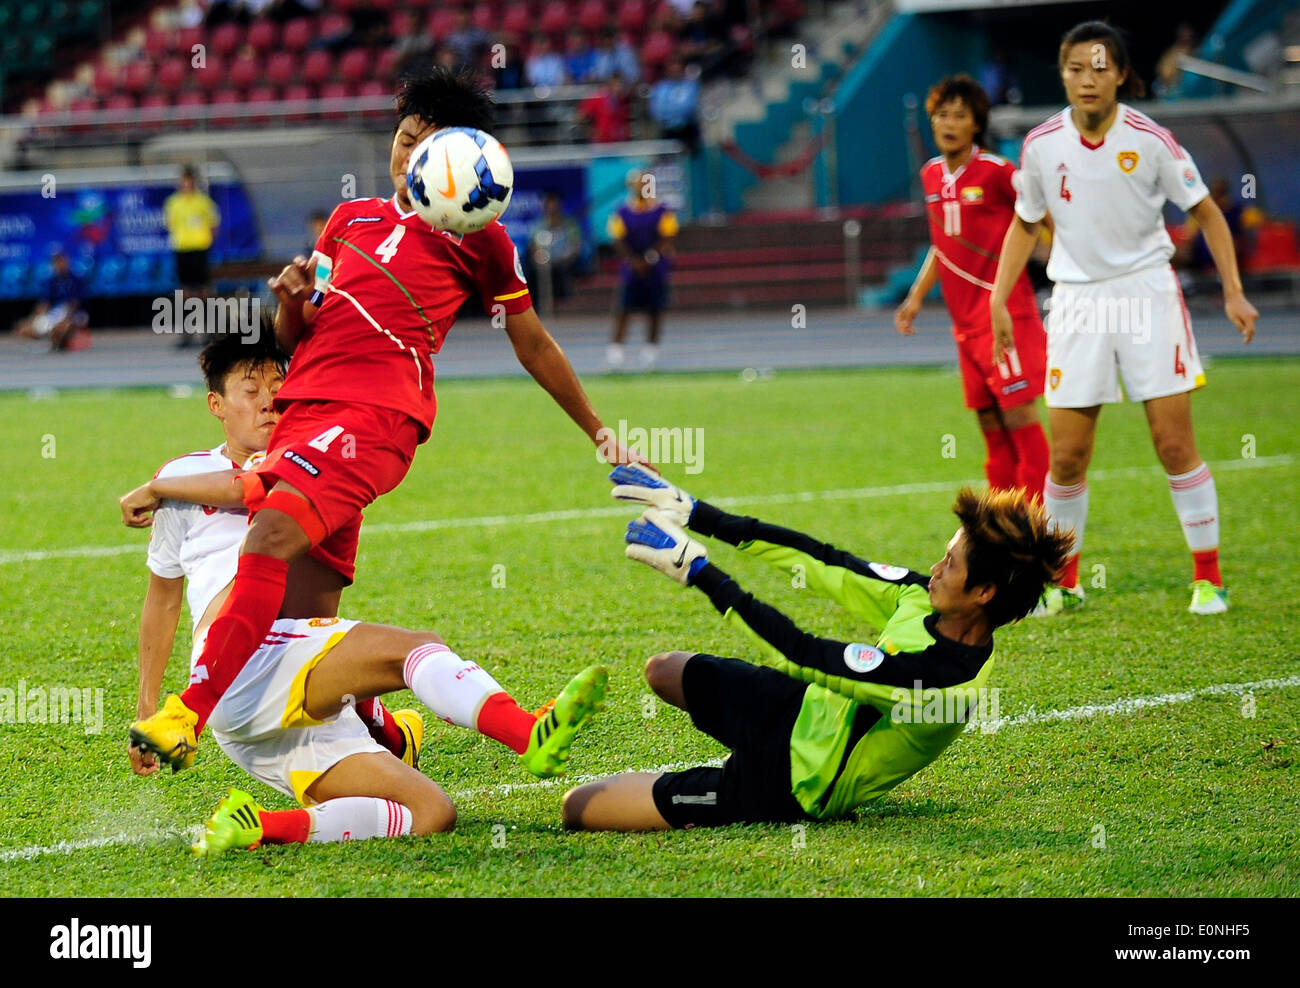 Ho Chi Minh, Vietnam. 17th May, 2014. Li Dongna (1st L) of China vies for the ball during the Group B match against Myanmar at the 2014 Women's AFC Cup held at Thong Nhat Stadium in Ho Chi Minh city, Vietnam, May 17, 2014. China advanced to World Cup 2015 after beating Myanmar 3-0. © He Jingjia/Xinhua/Alamy Live News Stock Photo